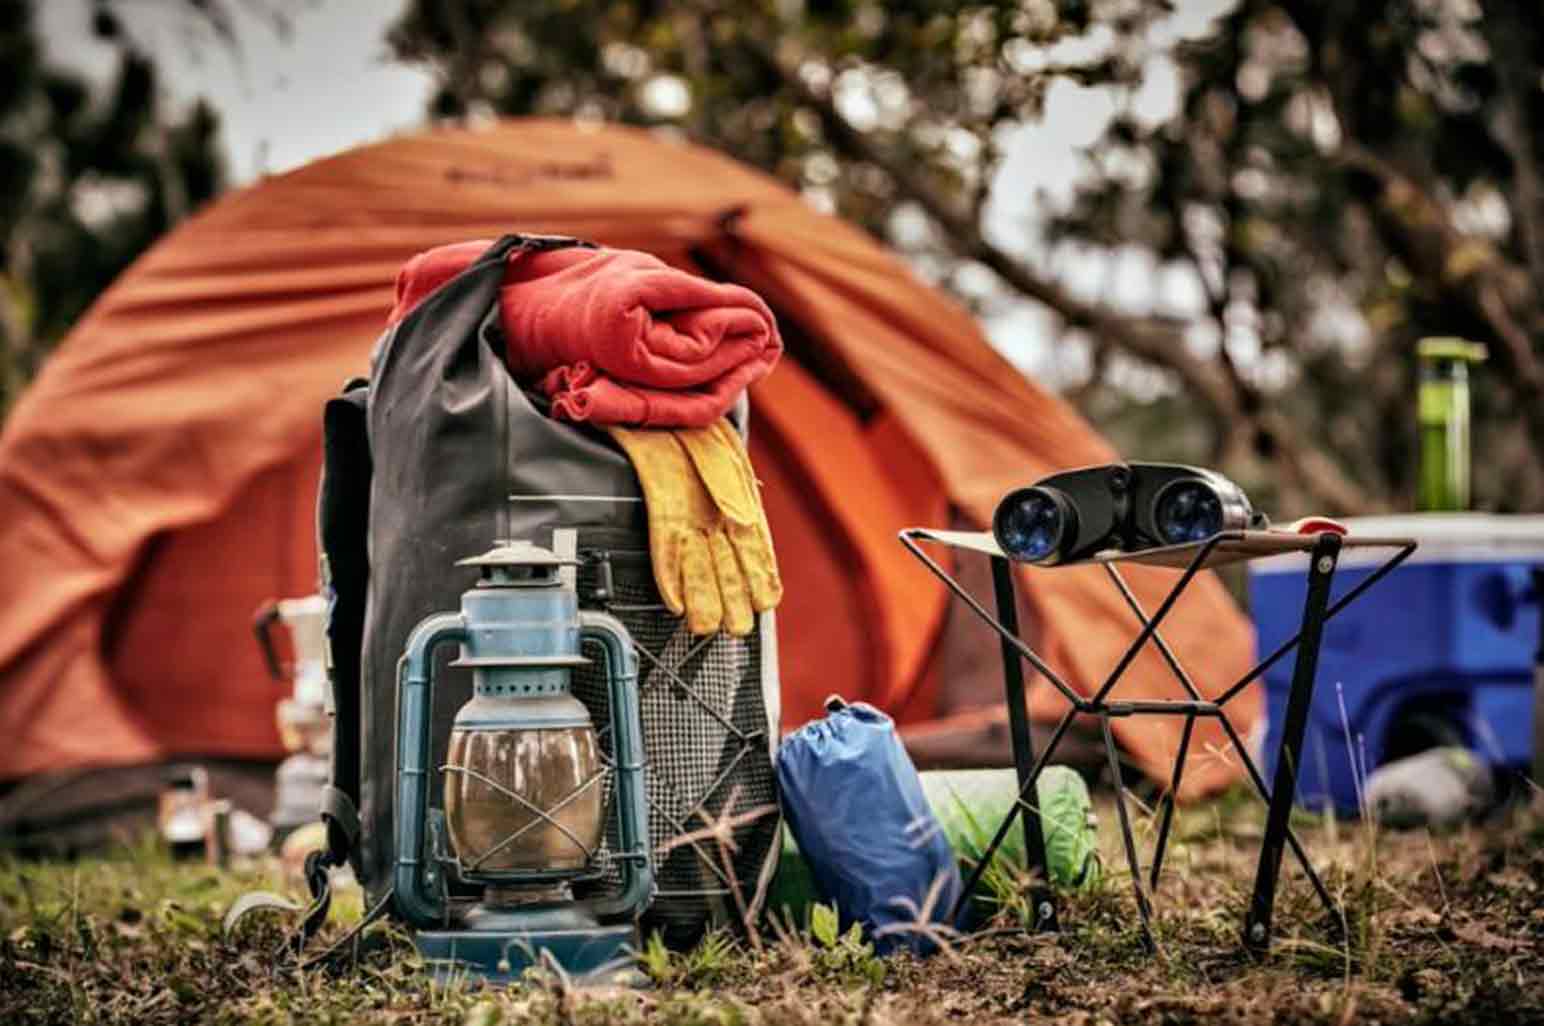 https://www.annmariejohn.com/wp-content/uploads/2021/06/Camping-Gadgets-Worth-Your-Investment.jpg